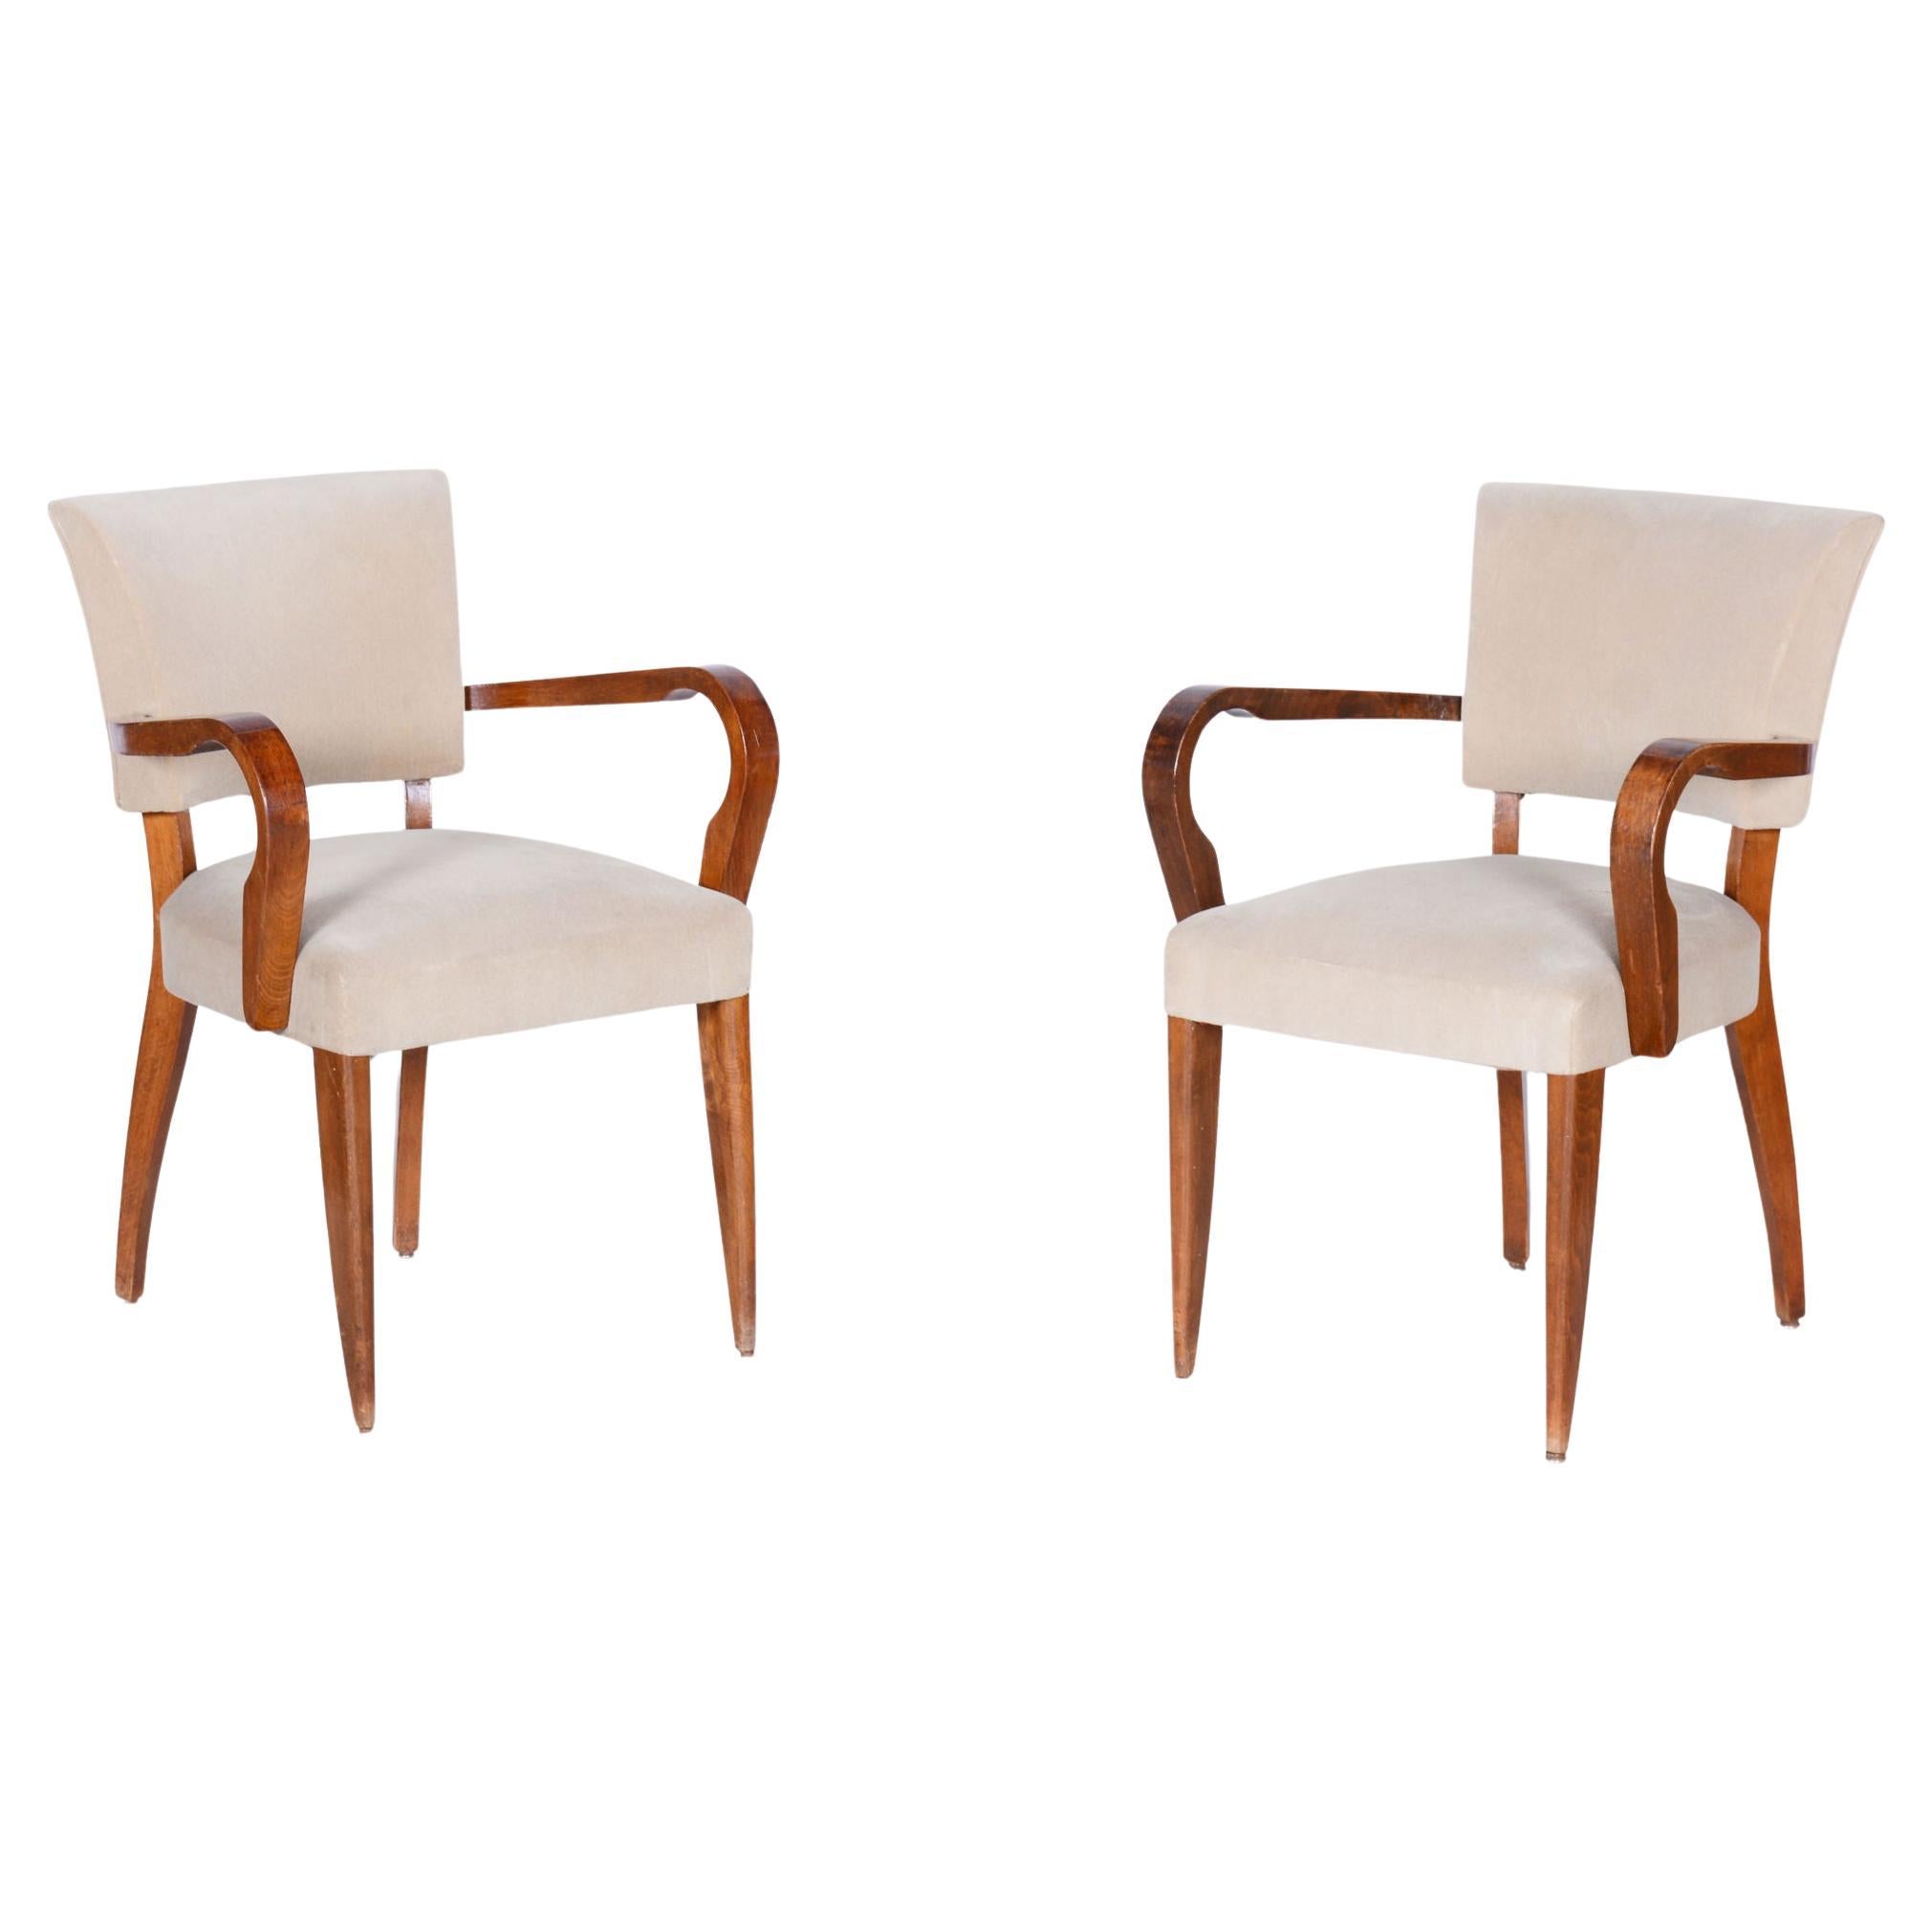 Set of Two Restored Art Deco Armchairs, by Jules Leleu, Beech, France, 1930s For Sale